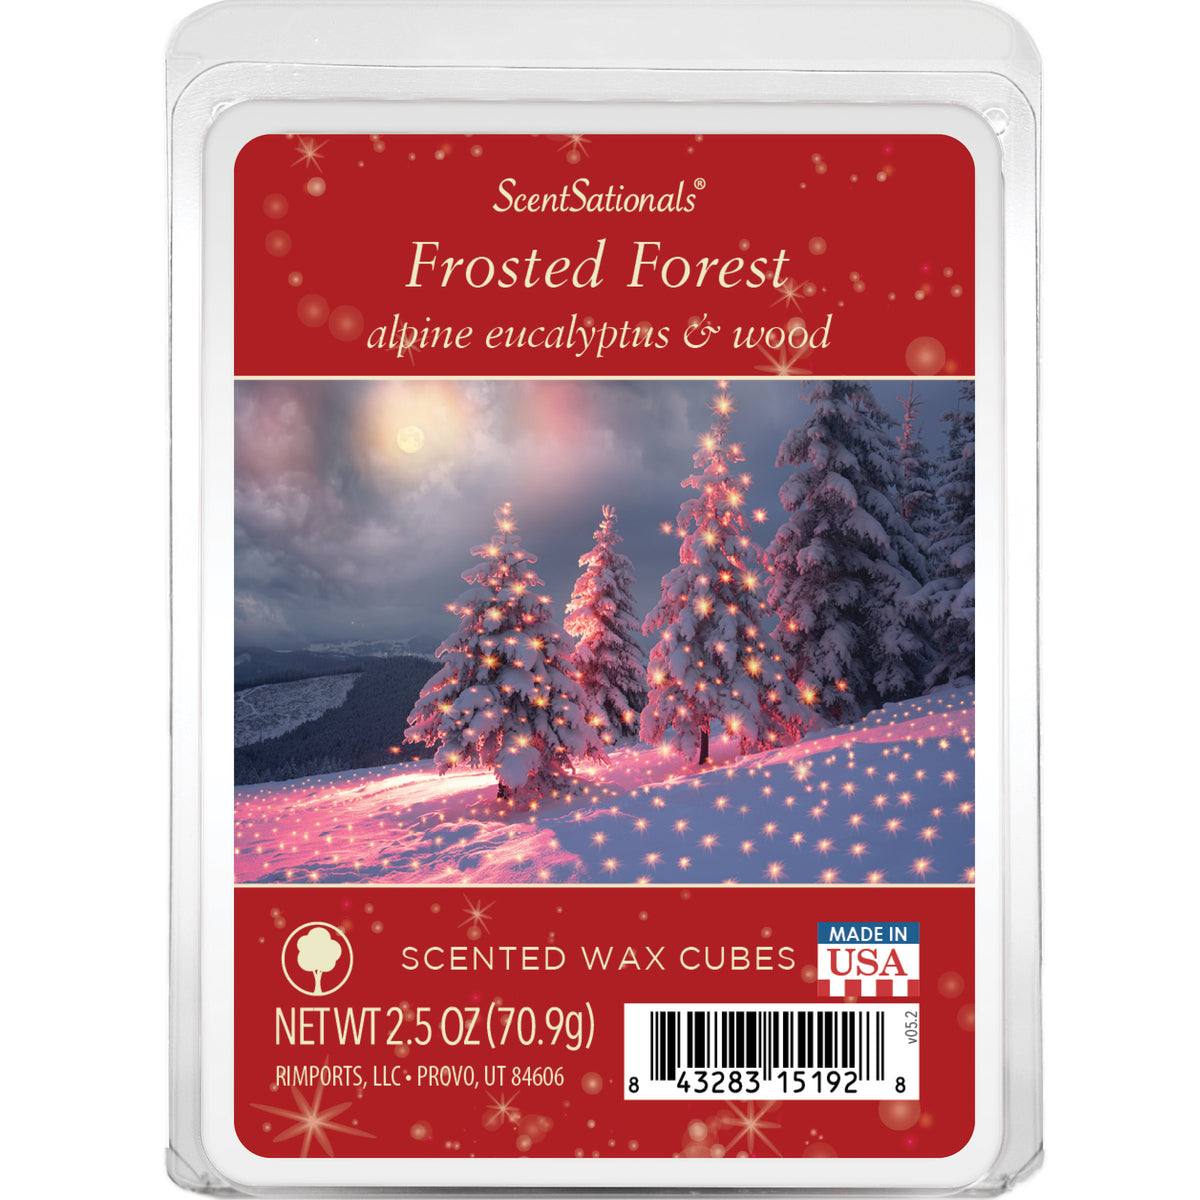 Into the Forest Scented Wax Melts